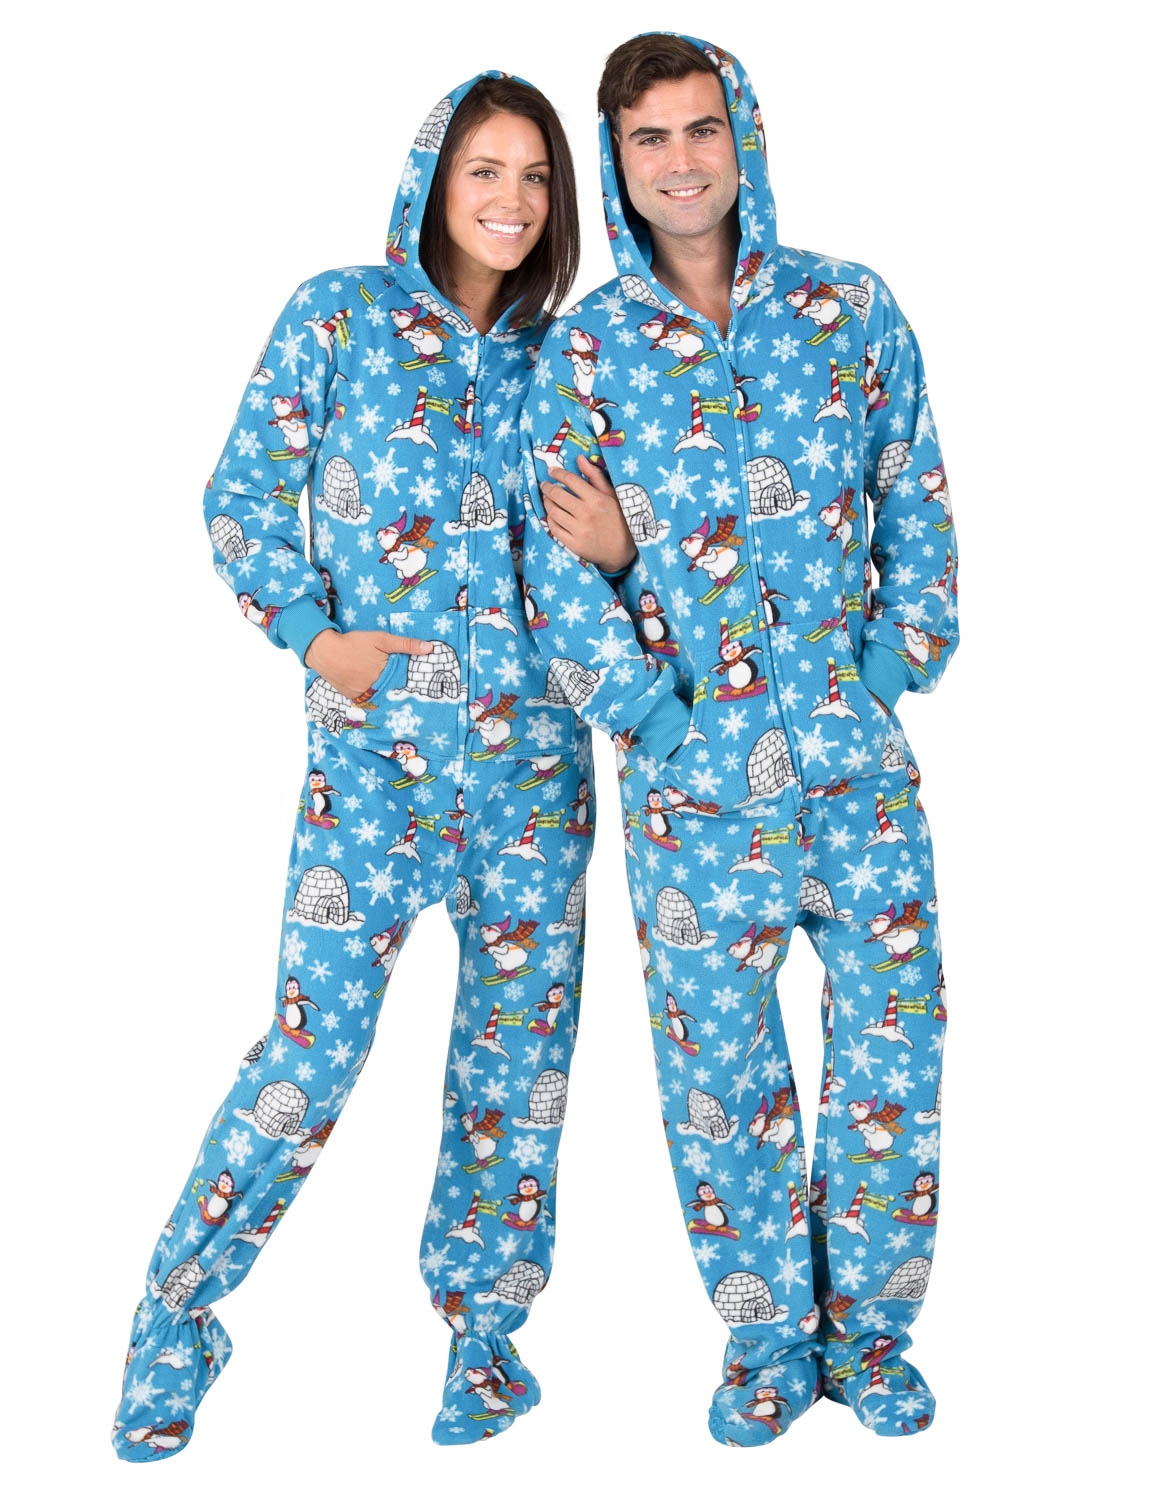 Footie pajamas: when comfy gets cozily  lazy